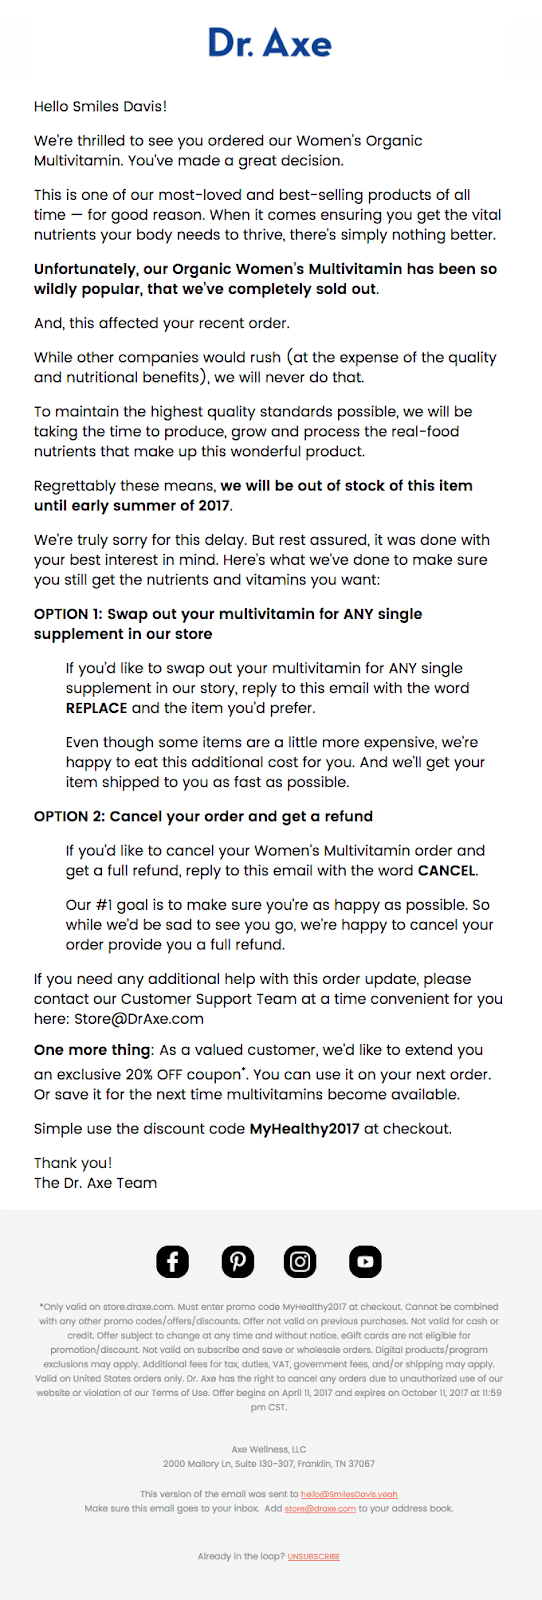 Out-of-stock email example from Axe Wellness